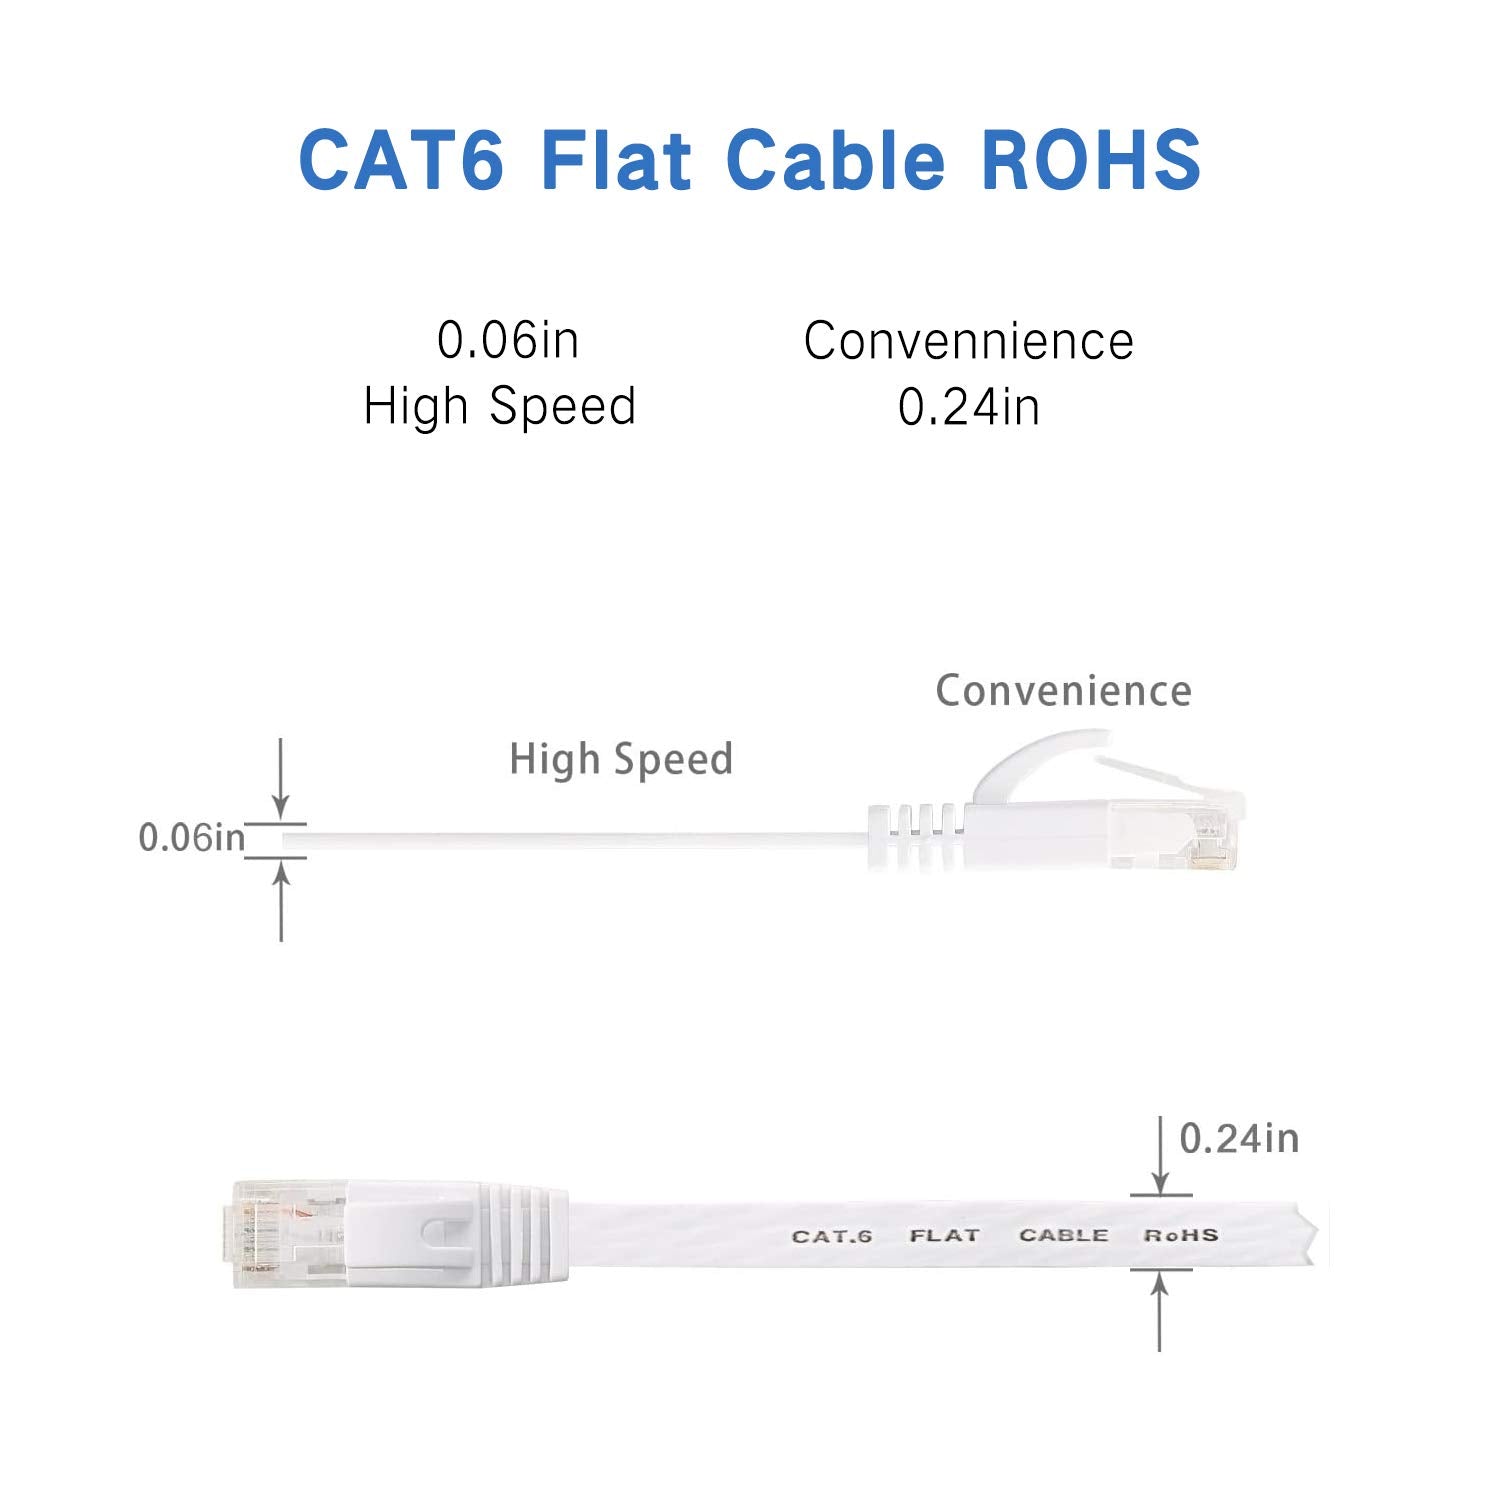 Gulaey 20m Cat6 Ethernet Cable, Long Internet Cables High-Speed Patch Cord Flat Design 1Gbps for 250Mhz/s UTP for Console, PS3, PS4, PS5, Switch, Router, Modem, Patch Panel, PC, TV, Home Office